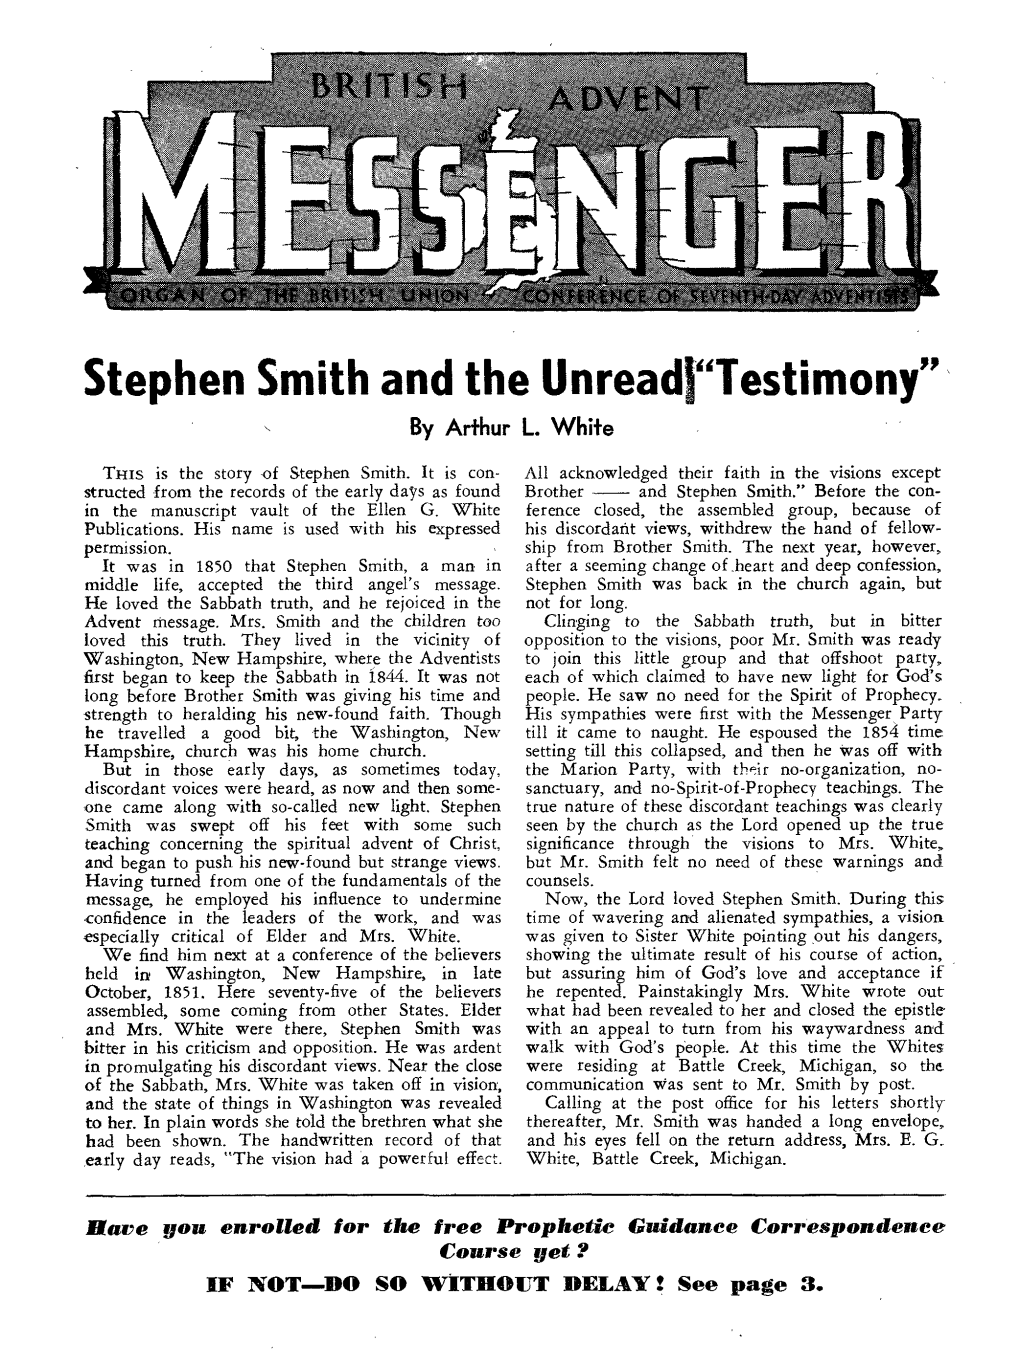 Stephen Smith and the Unread. Testimony" by Arthur L